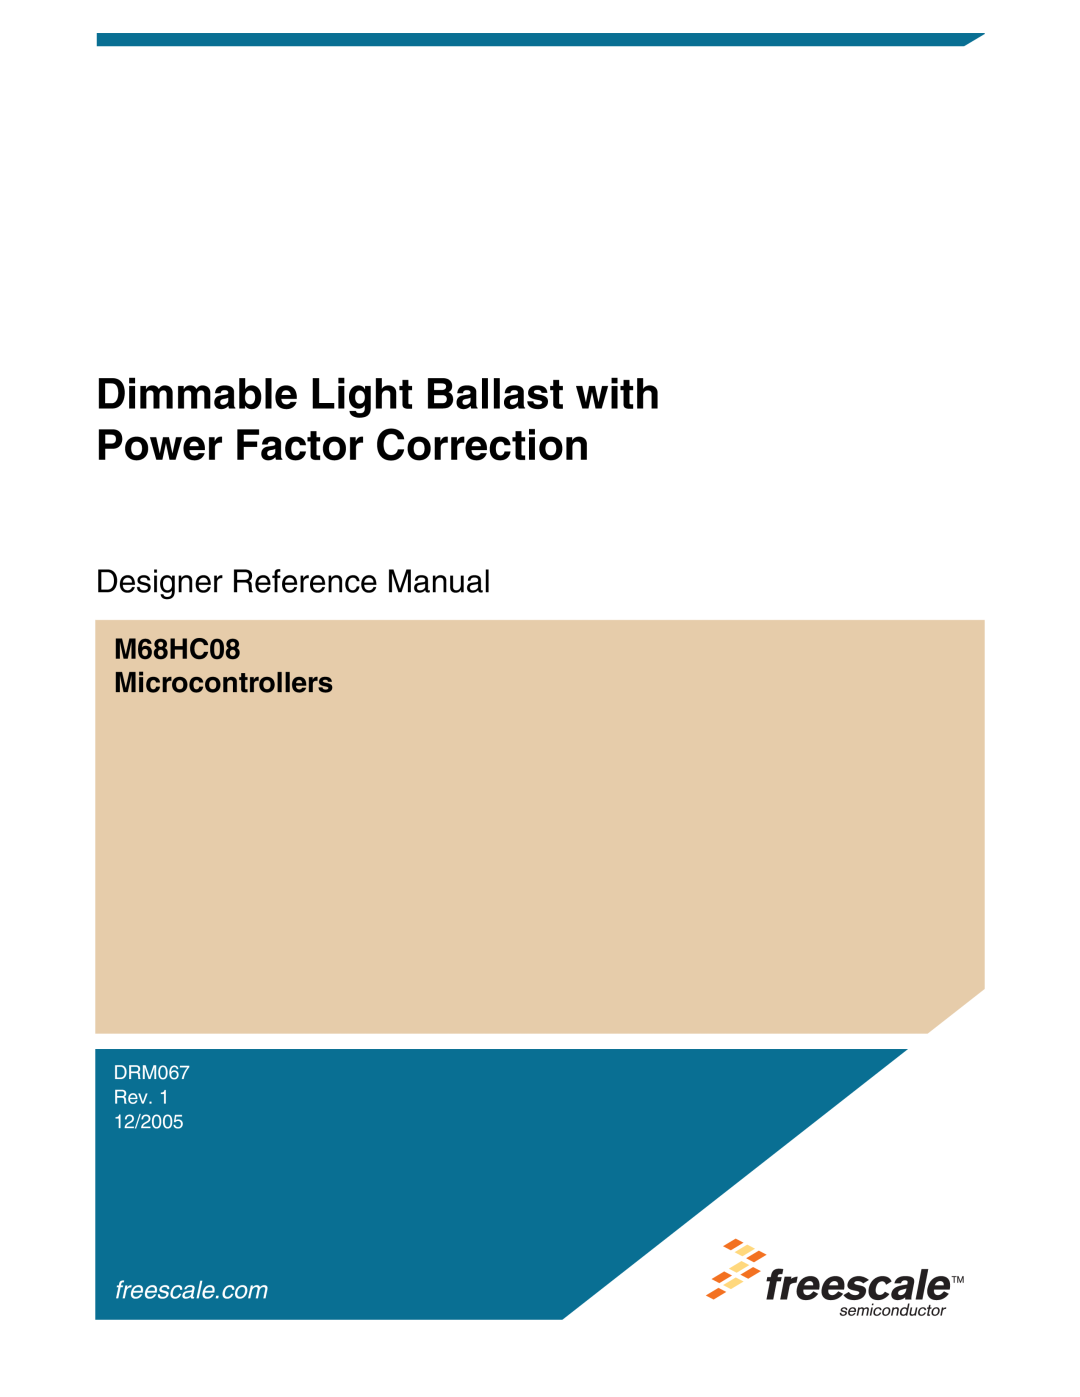 Freescale Semiconductor manual Designer Reference Manual, M68HC08 Microcontrollers, DRM067 Rev. 1 12/2005 